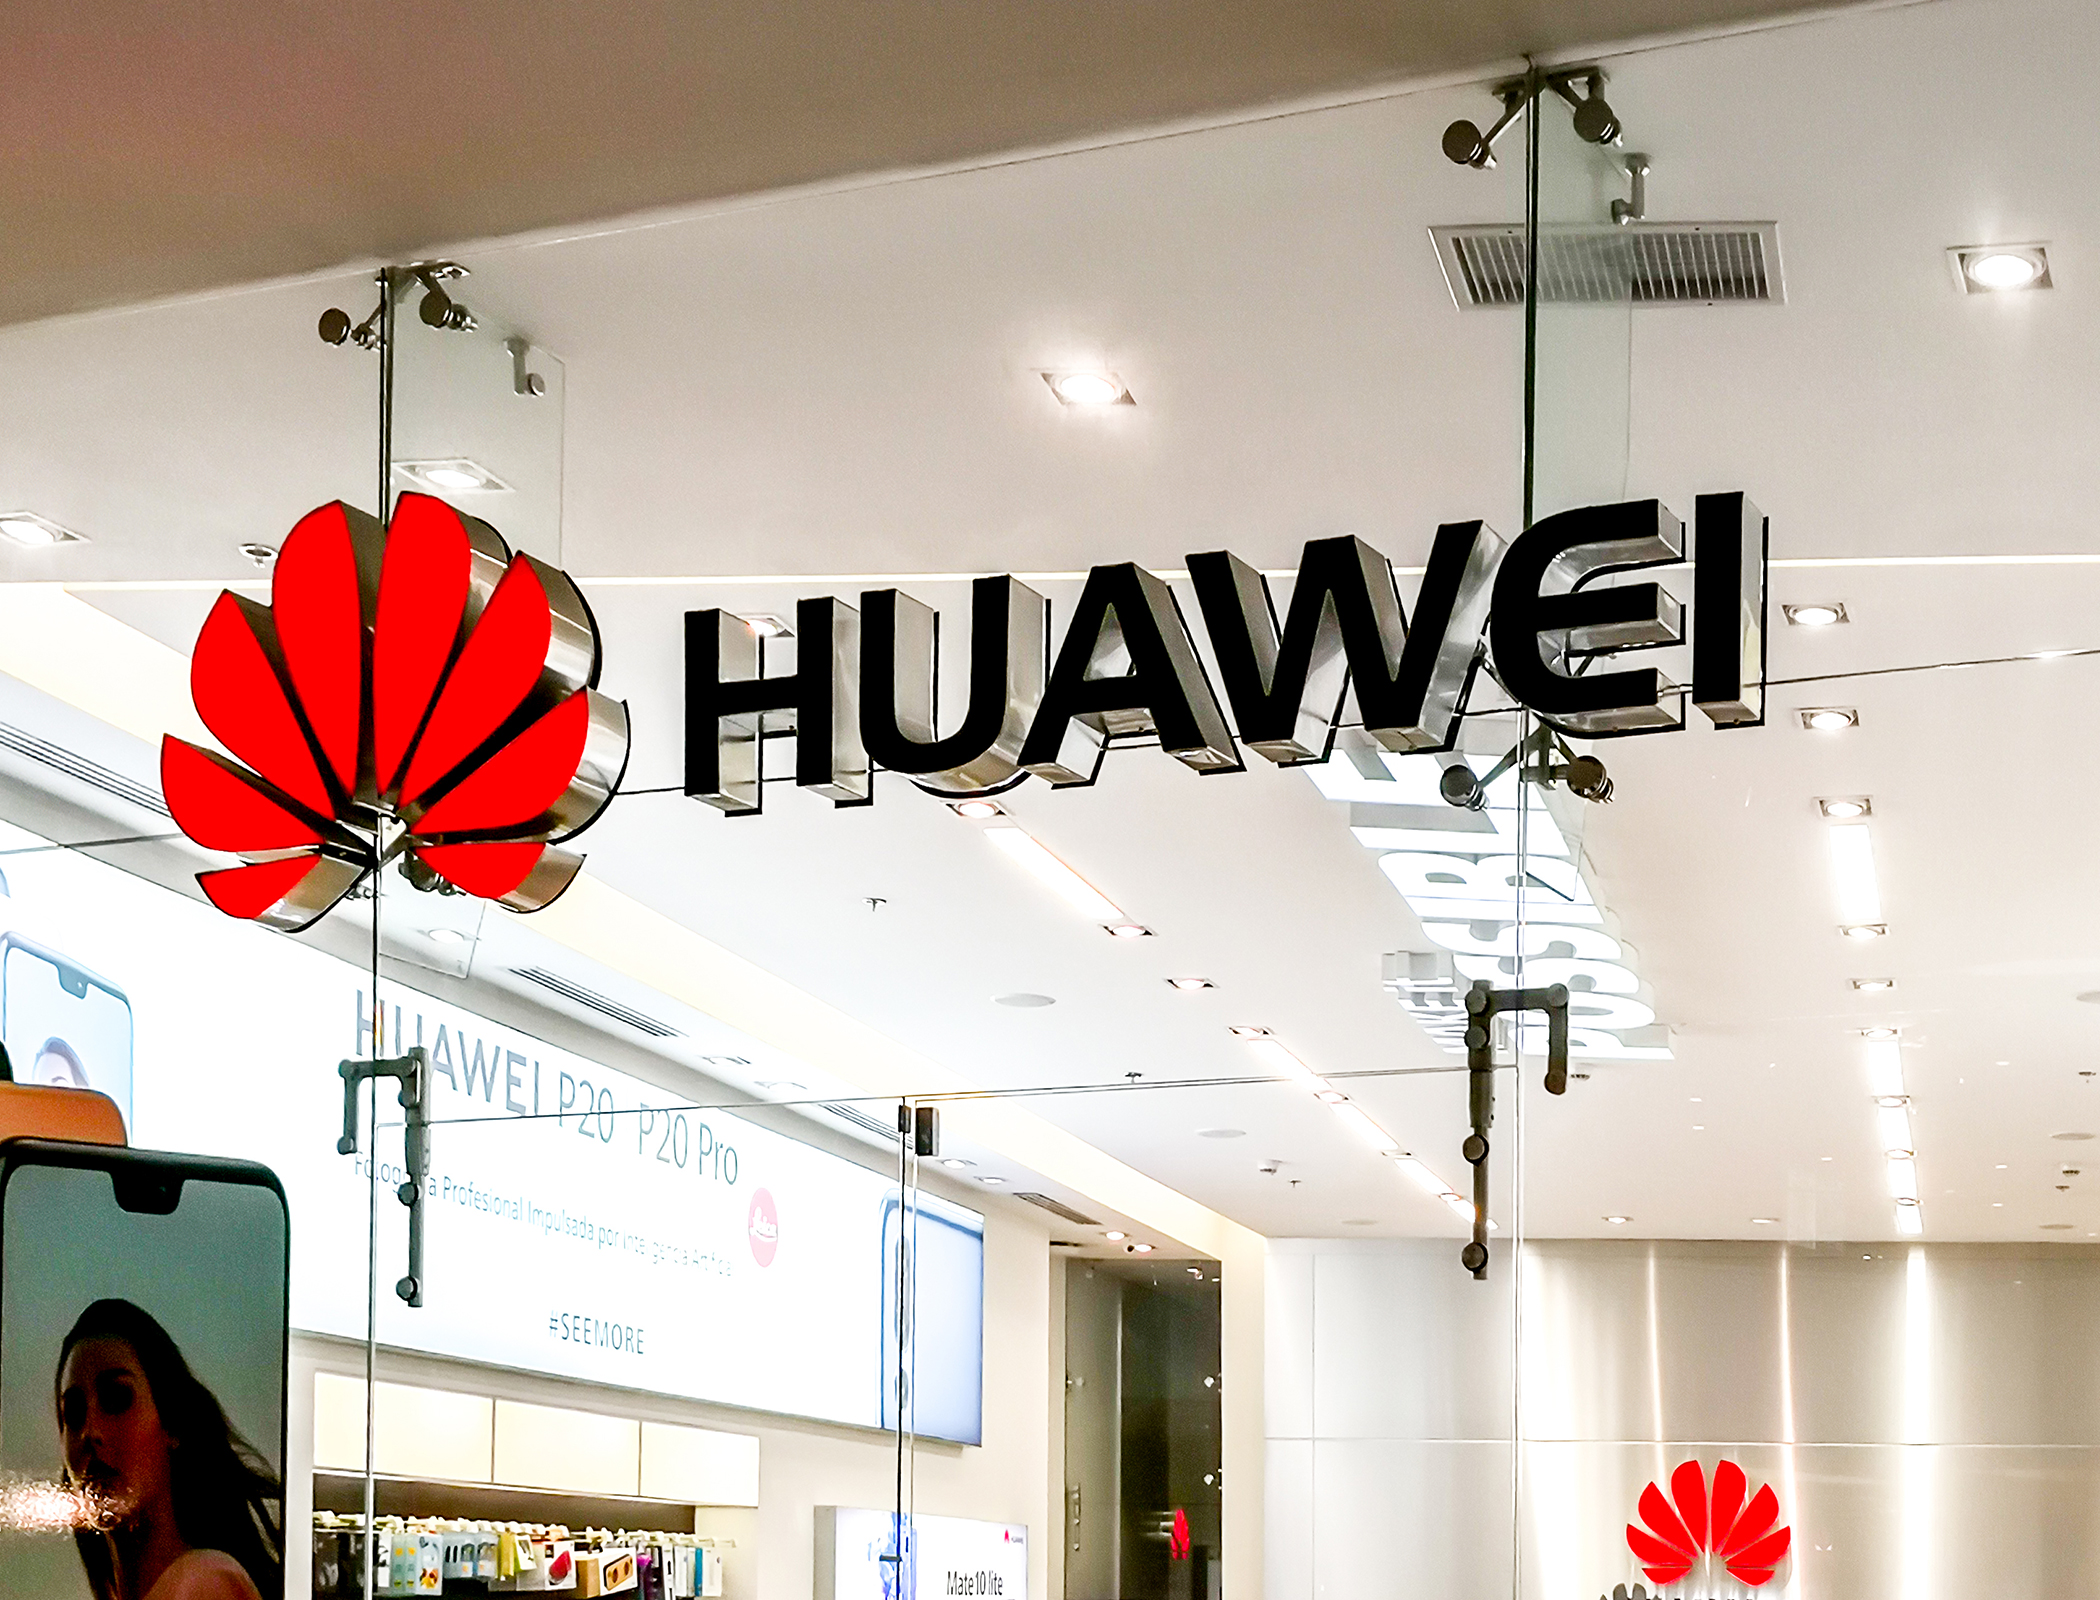 New Huawei smartphone includes advanced China-made chip, surprising analysts